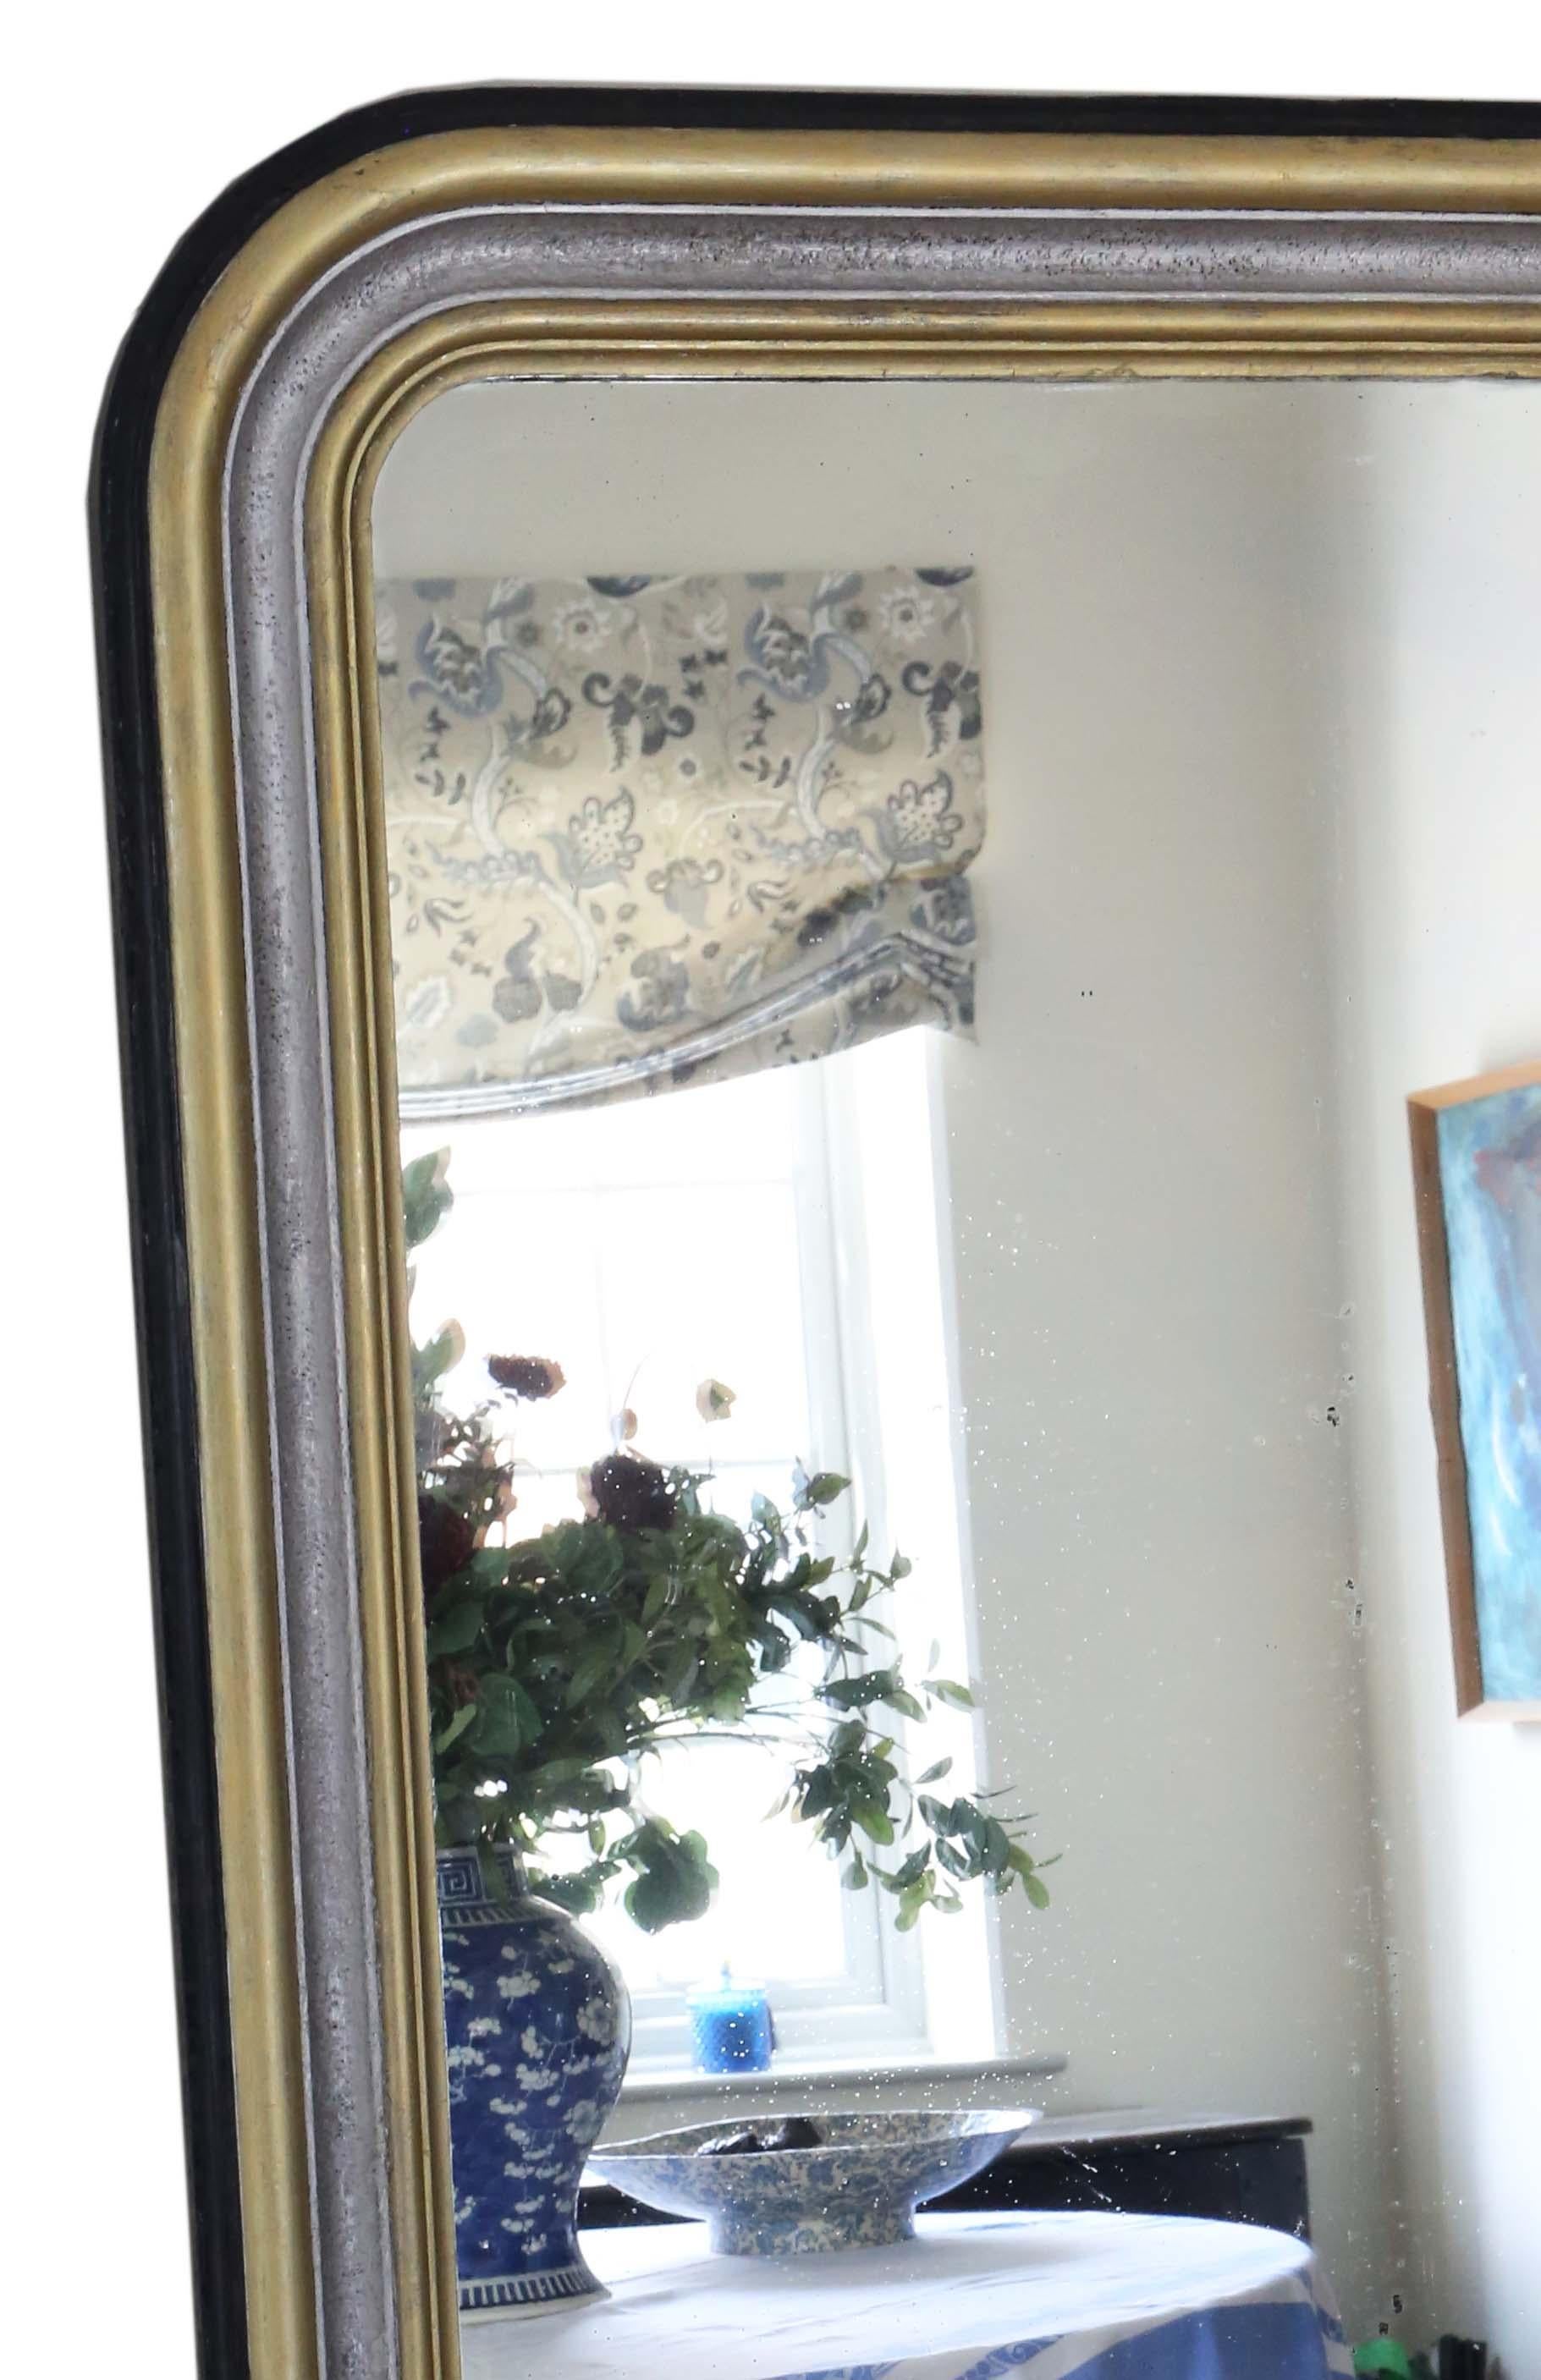 Antique 19th century very large quality ebonized silver and gilt floor wall overmantle mirror.

An impressive rare find, that would look amazing in the right location. No loose joints or woodworm.

The original mirrored glass has light